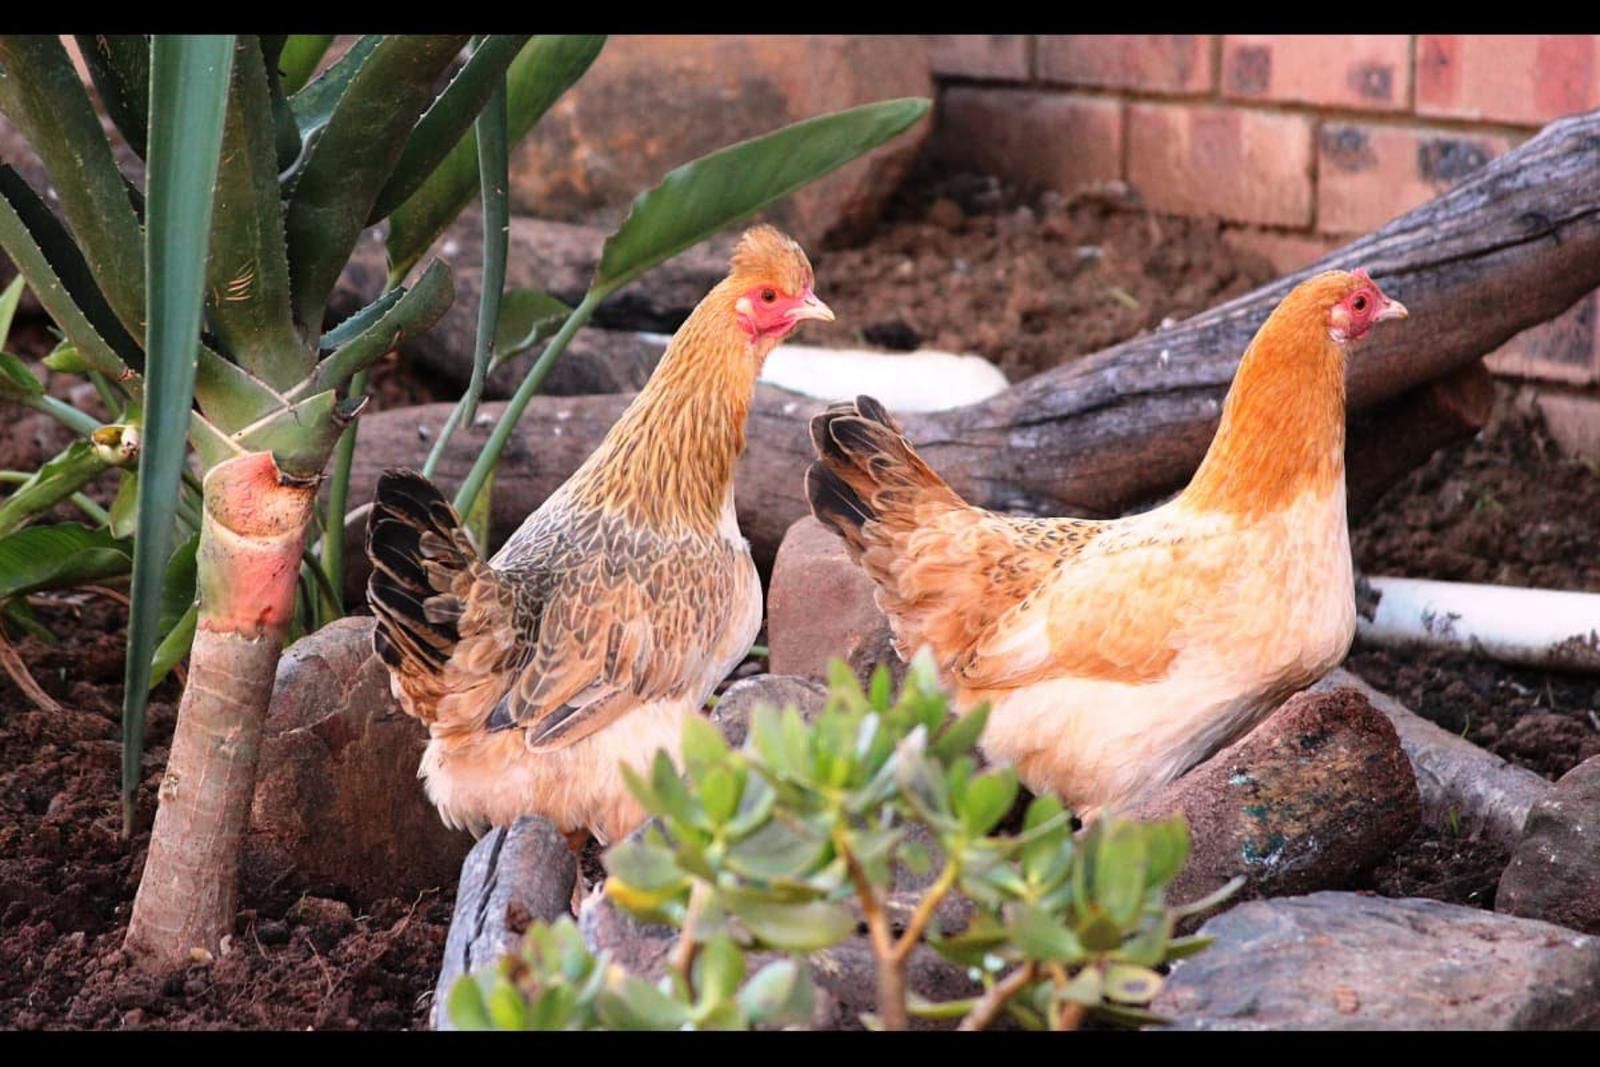 New Haven Guesthouse Pioneer Park Newcastle Kwazulu Natal South Africa Chicken, Bird, Animal, Agriculture, Farm Animal